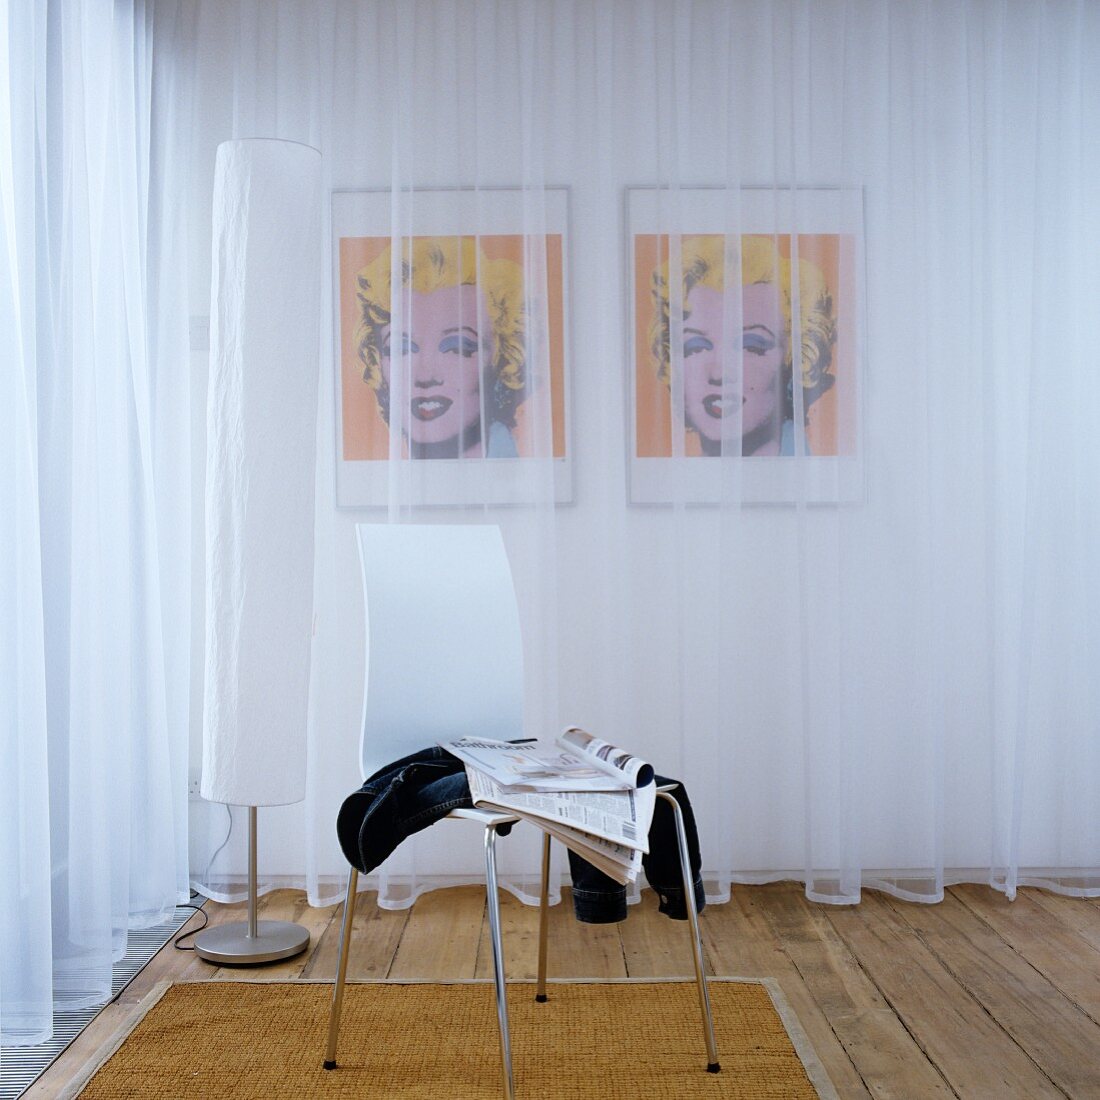 White shell chair in front of standard lamp next to transparent curtains; pair of portraits of Marilyn Monroe behind curtains